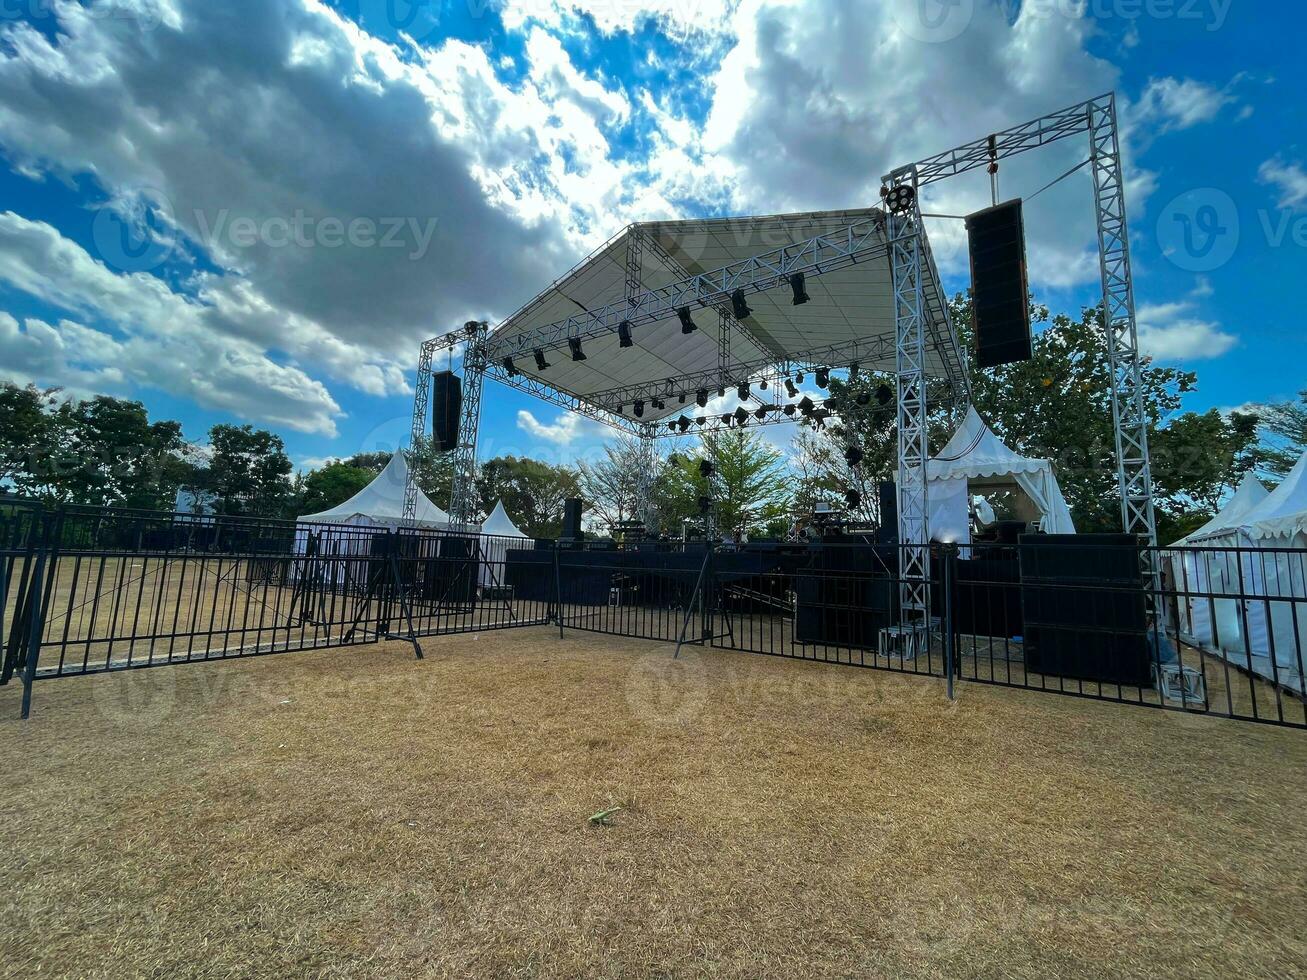 concert stage. Empty concert stage at an outdoor concert without audience, performers. concert stage on field photo